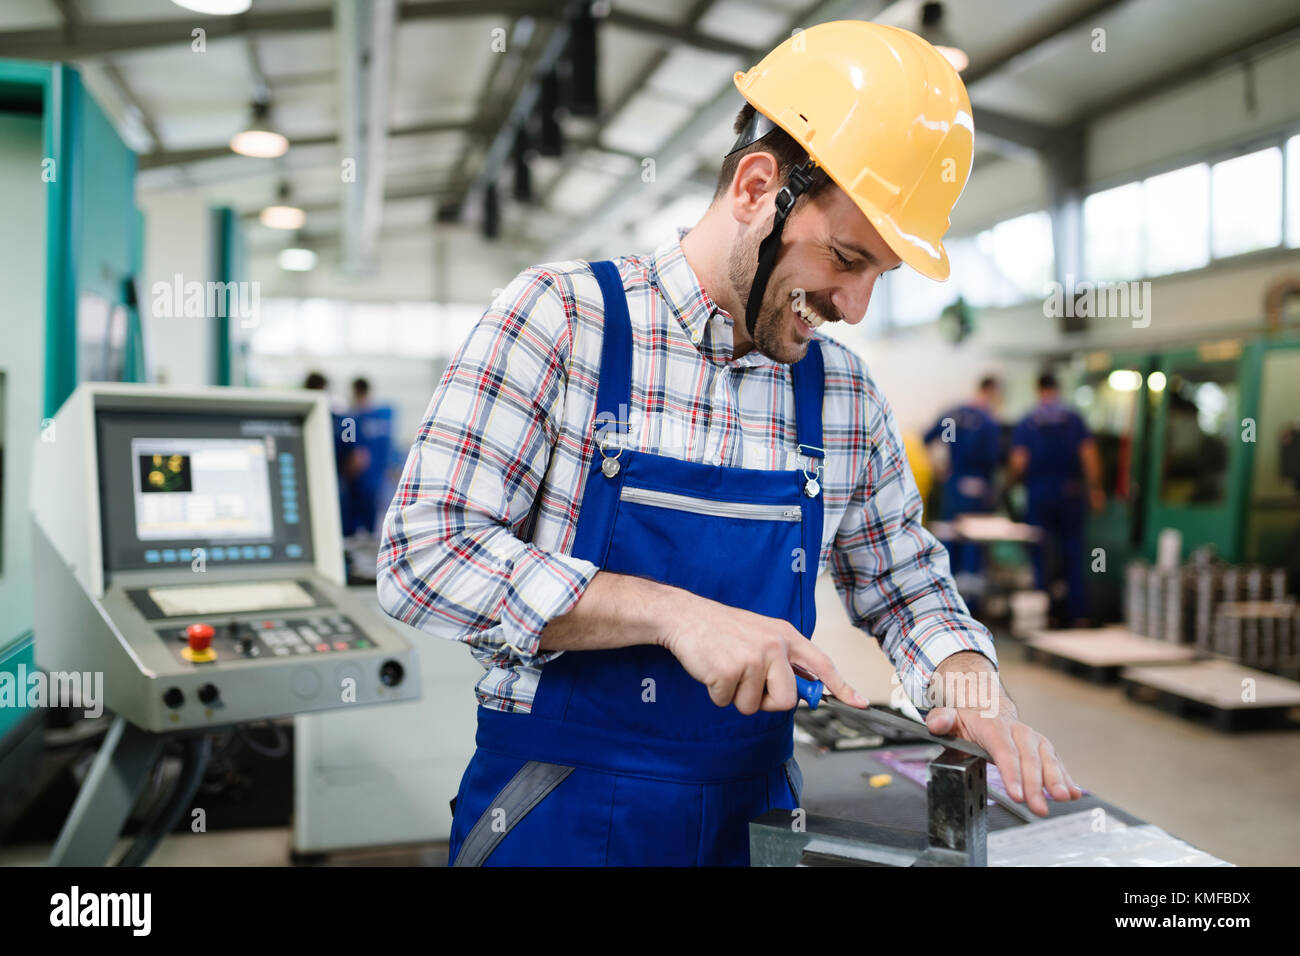 industrial factory employee working in metal manufacturing industry Stock Photo